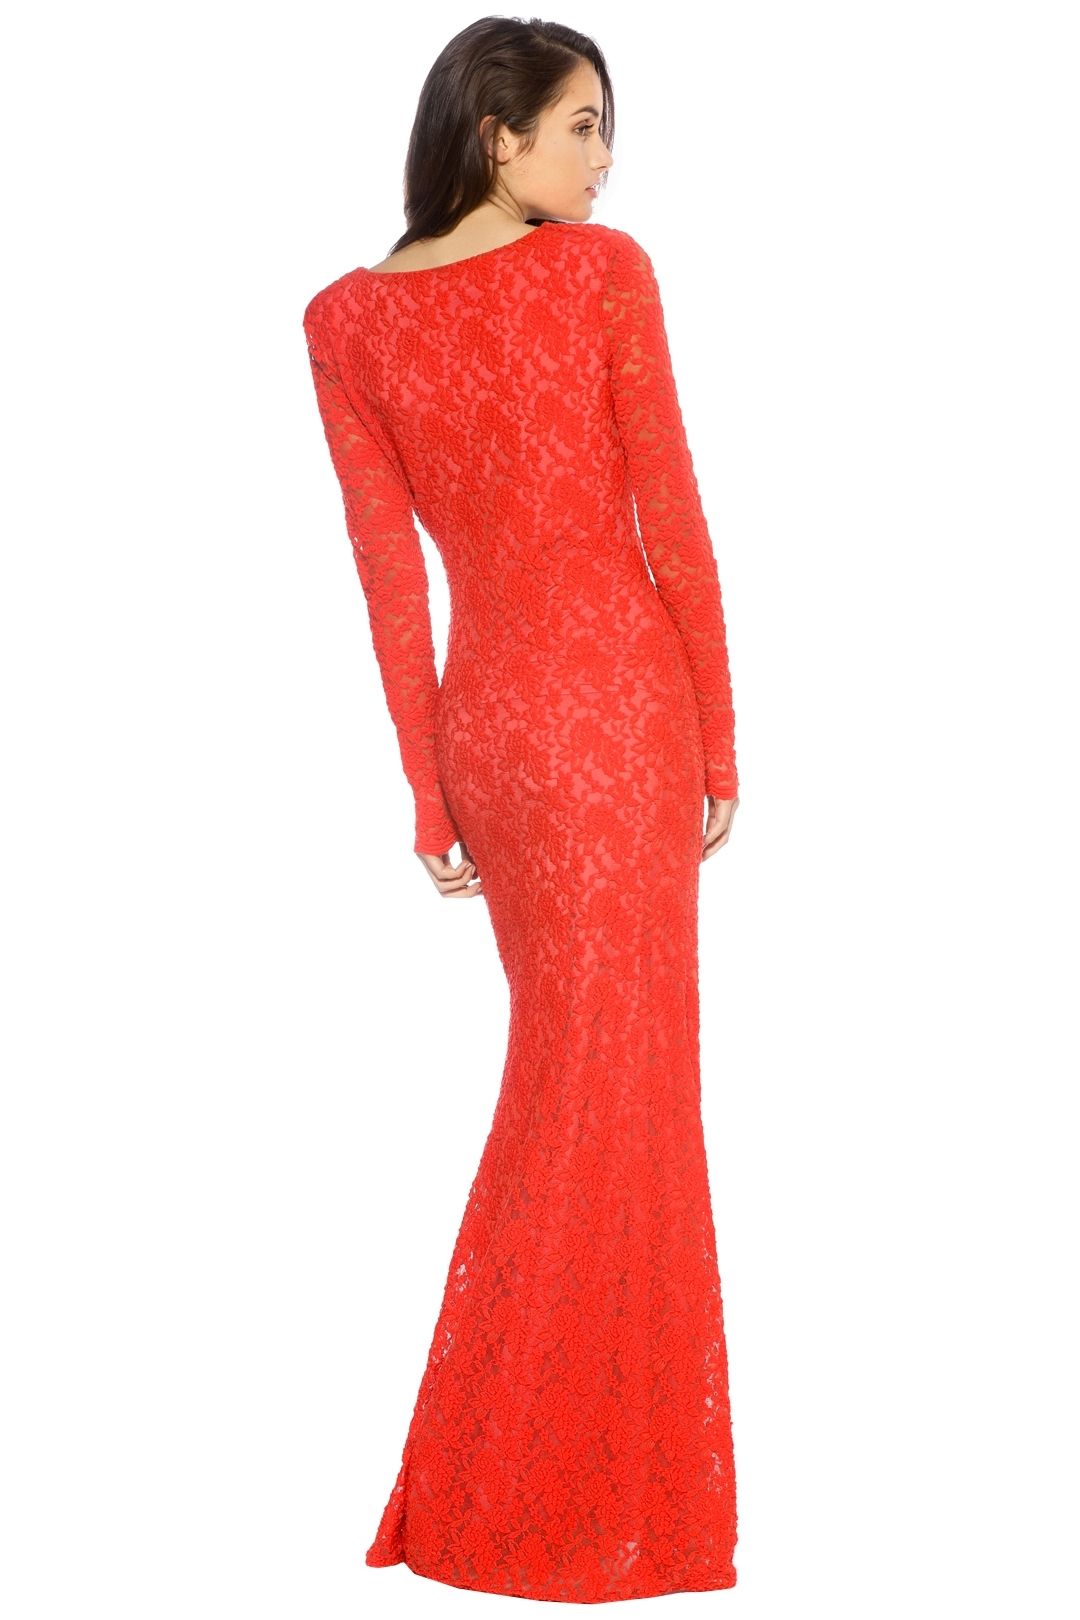 Ae'lkemi - V Plunge Red Long Sleeve Gown - Red - Back